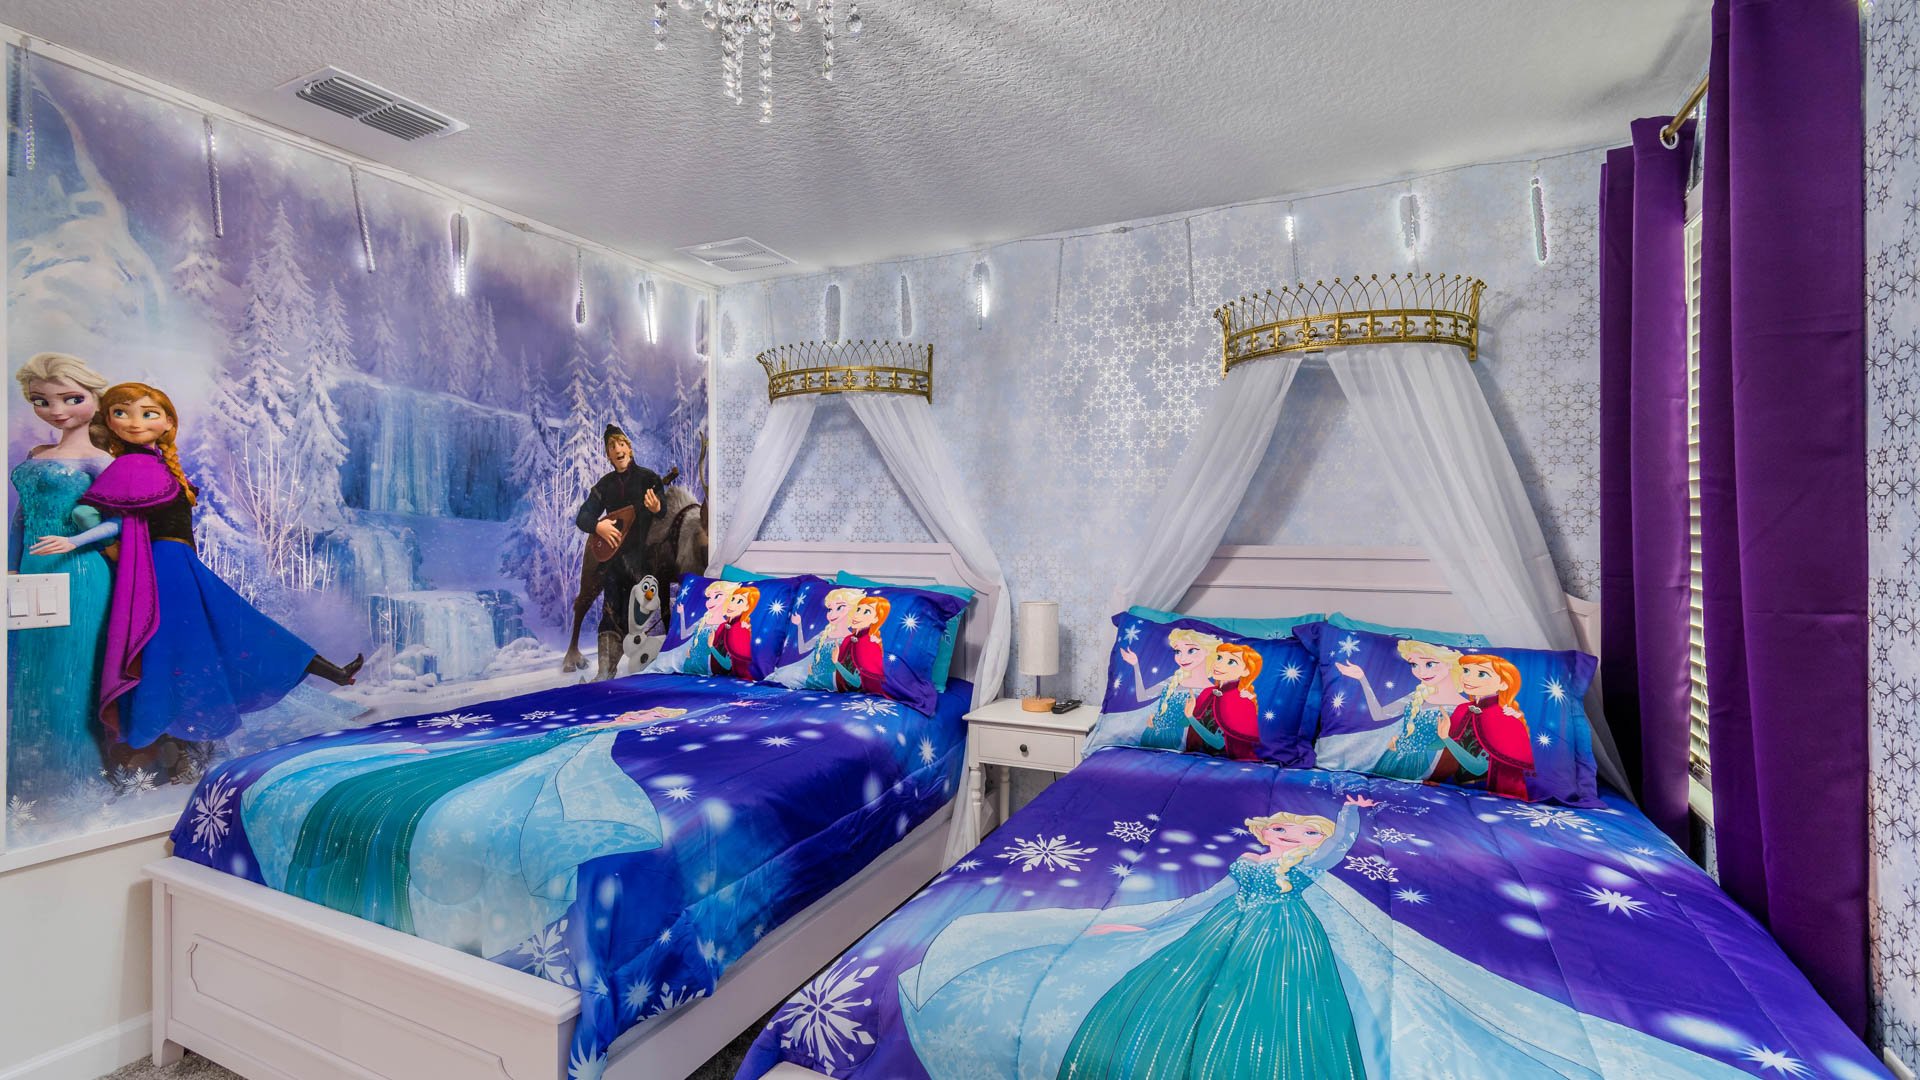 Two Doubles Bedroom 3 upstairs
Frozen Theme
Shared Bathroom